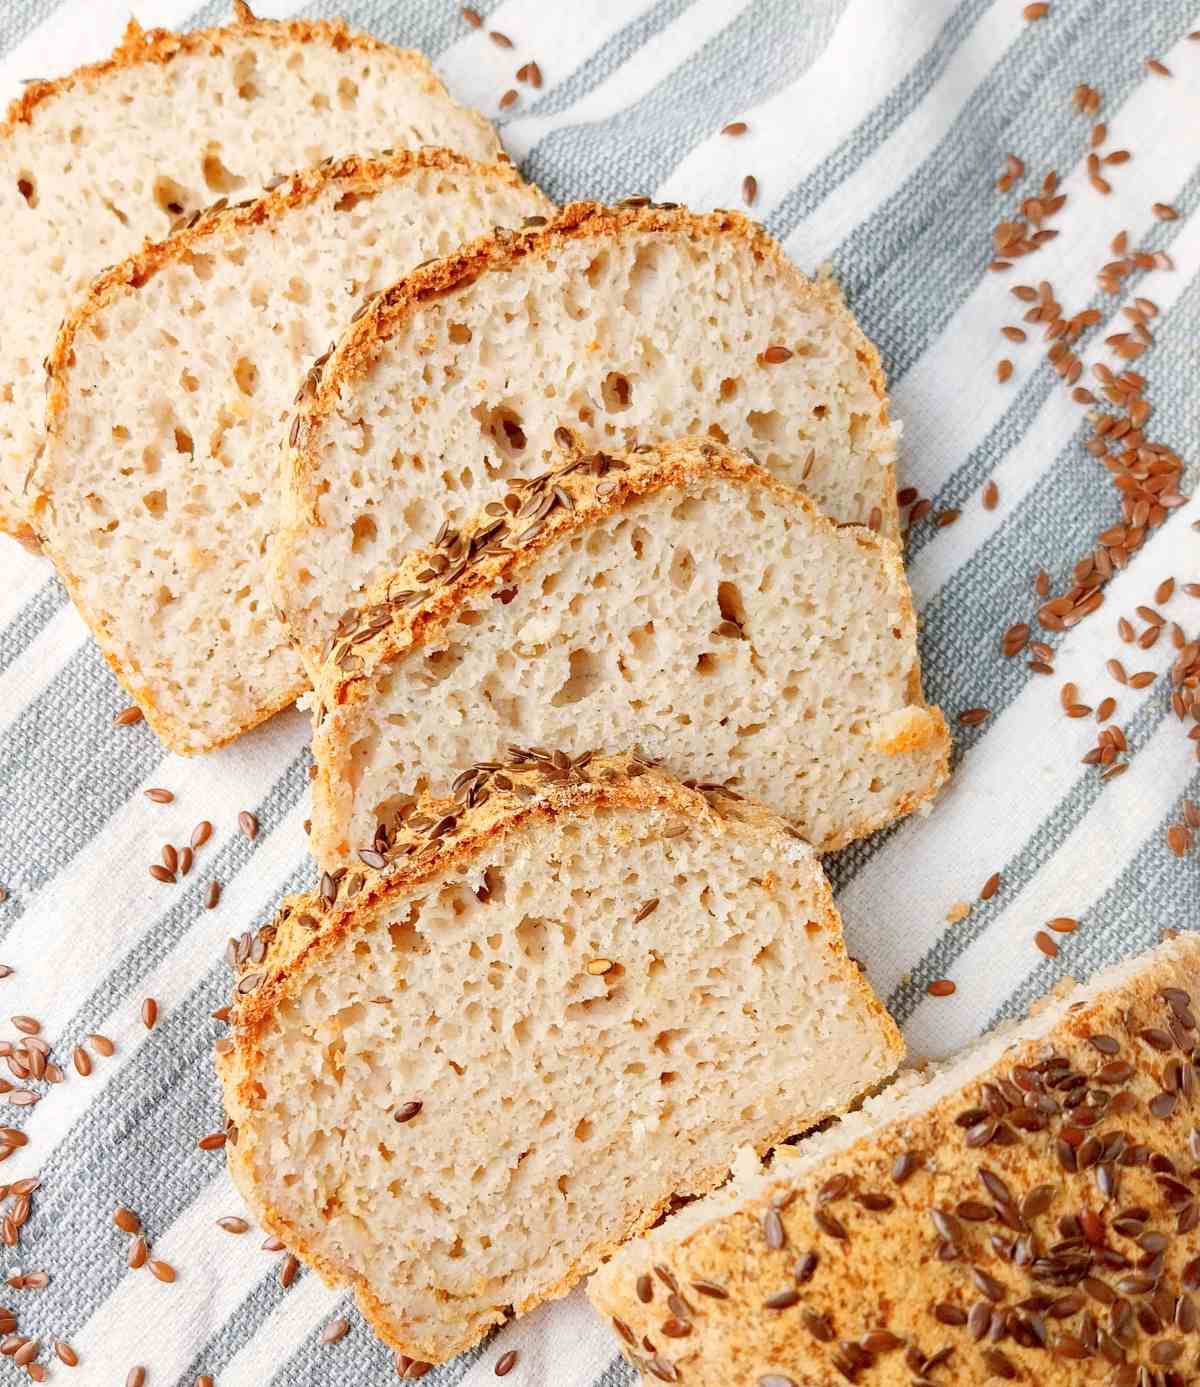 Brown rice bread sliced.